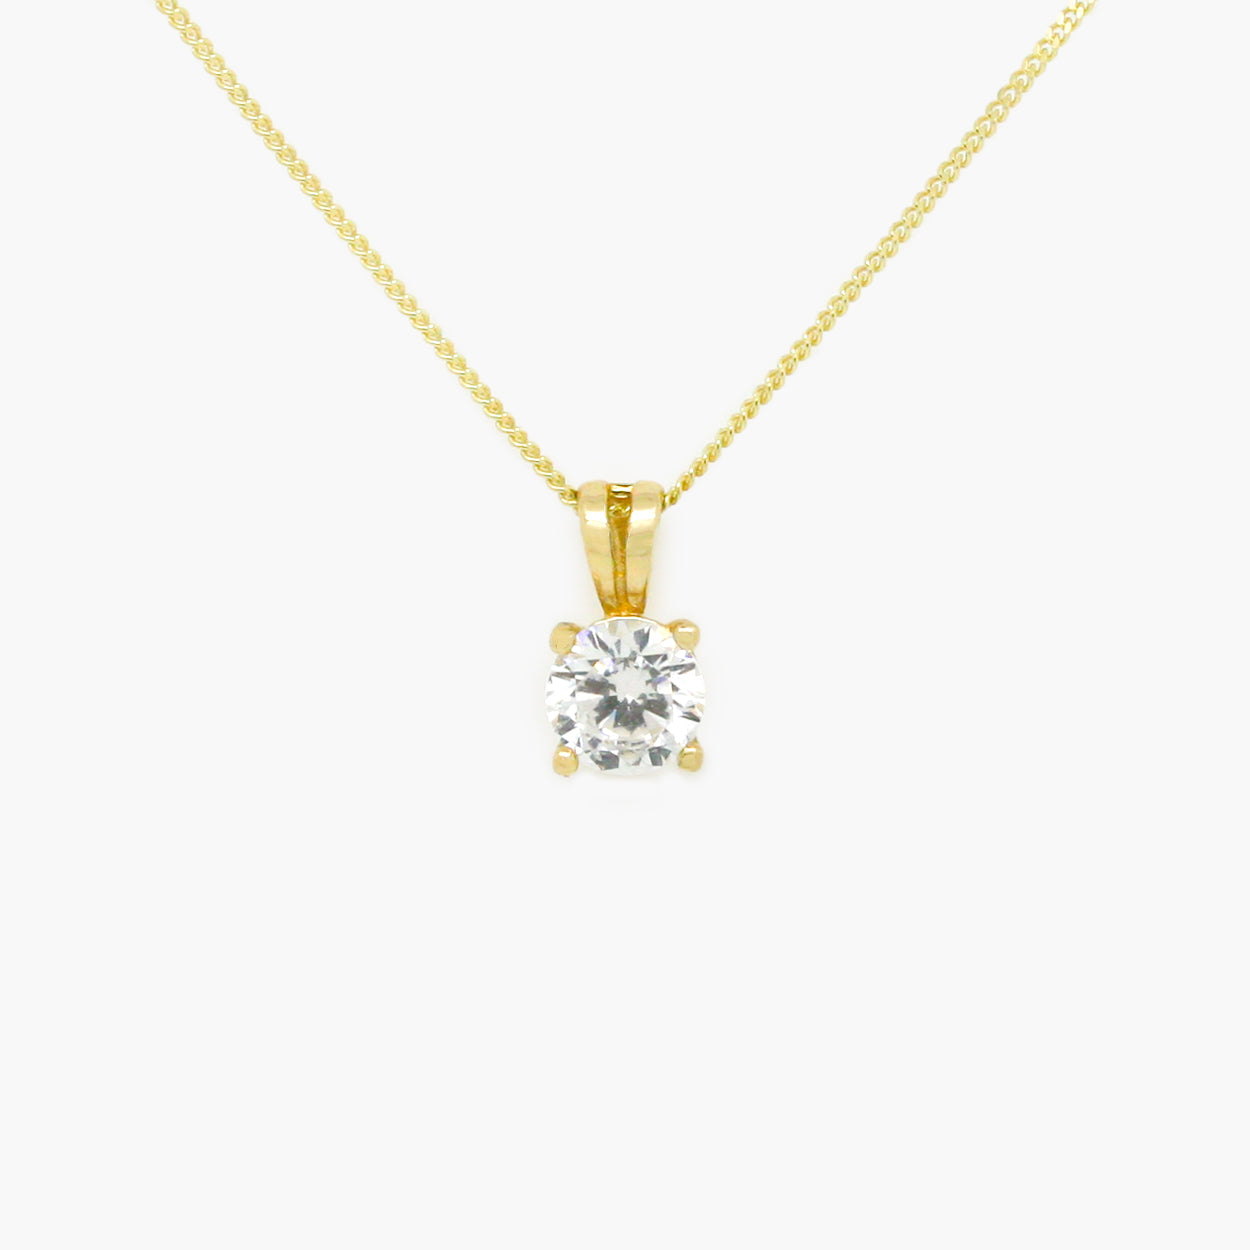 yellow gold cz pendant and necklace